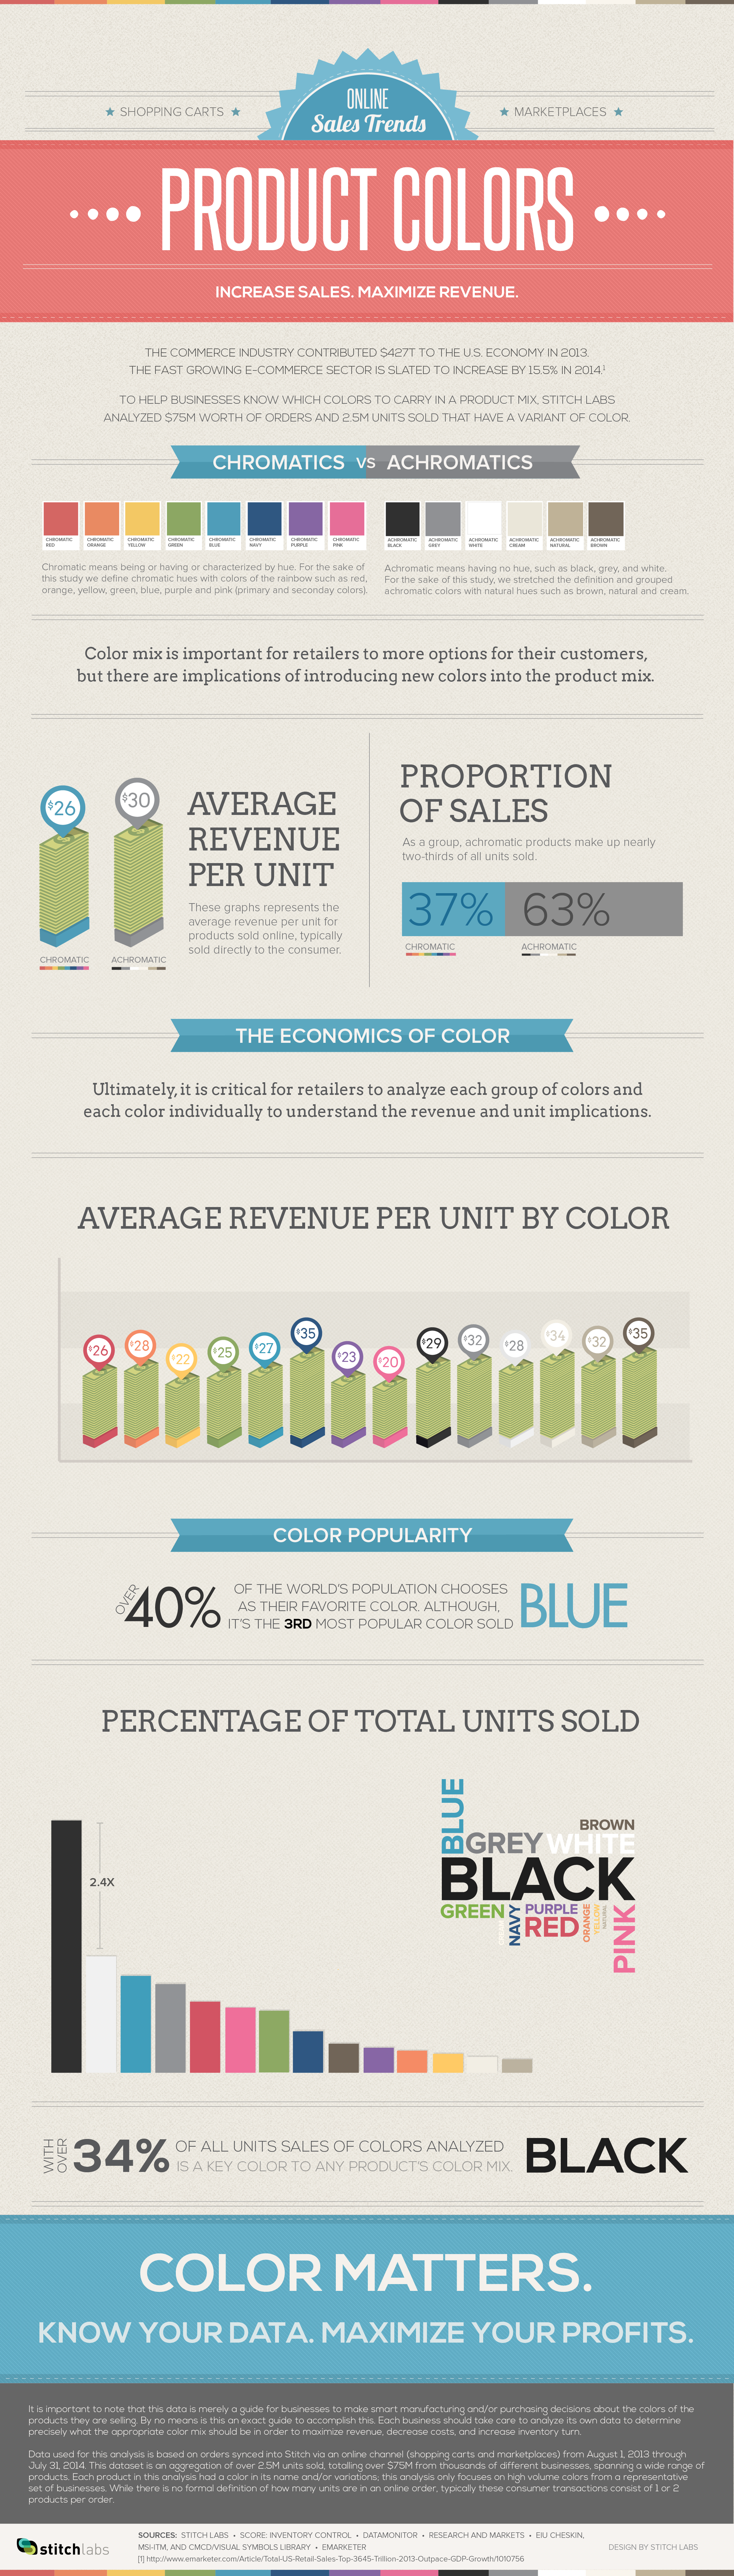 The Economics of Color in Retail